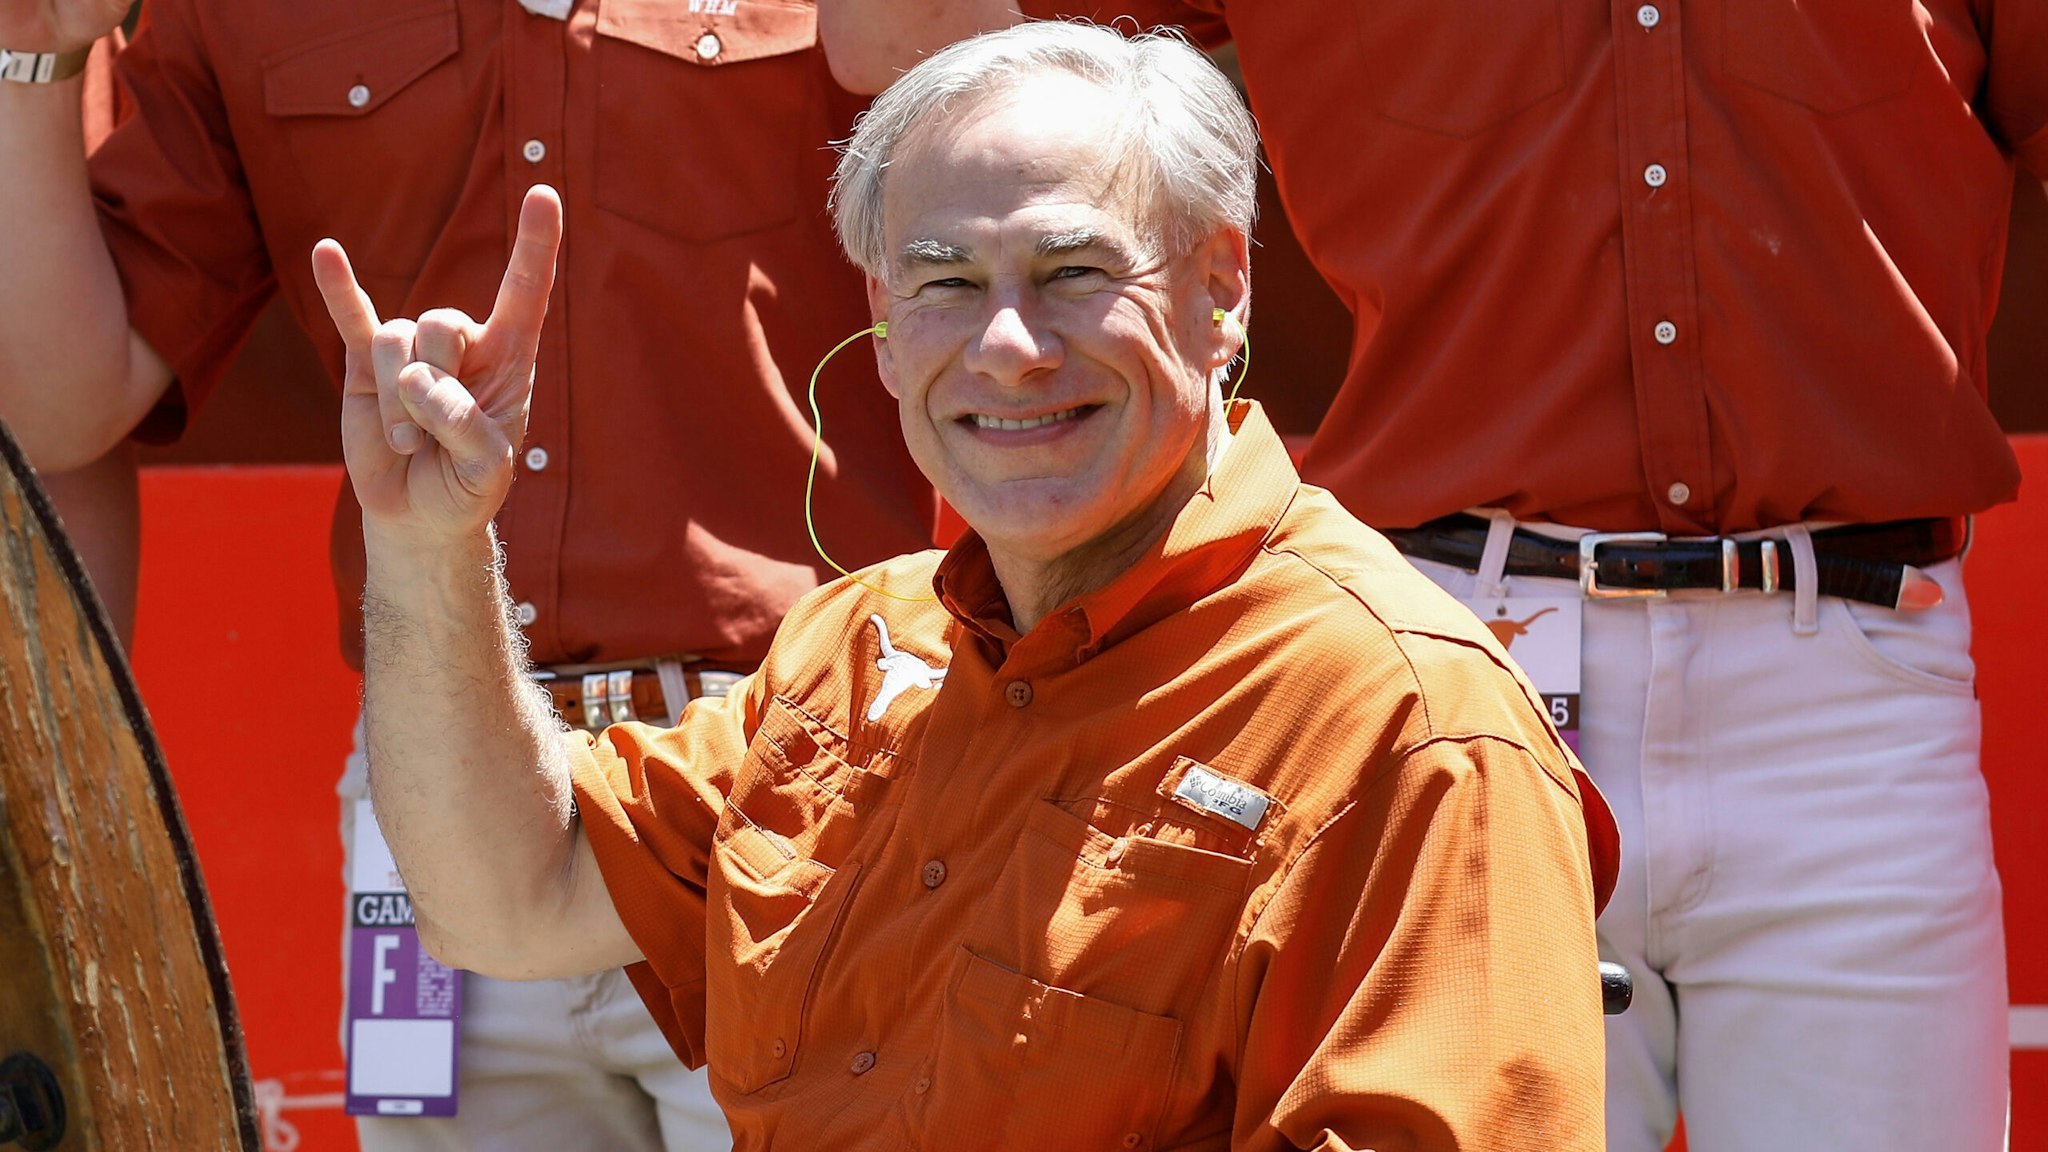 AUSTIN, TEXAS - APRIL 24: Texas Governor Greg Abbott poses for a photo with members of the Silver Spurs during the Texas Football Orange-White Spring Game at Darrell K Royal-Texas Memorial Stadium on April 24, 2021 in Austin, Texas.